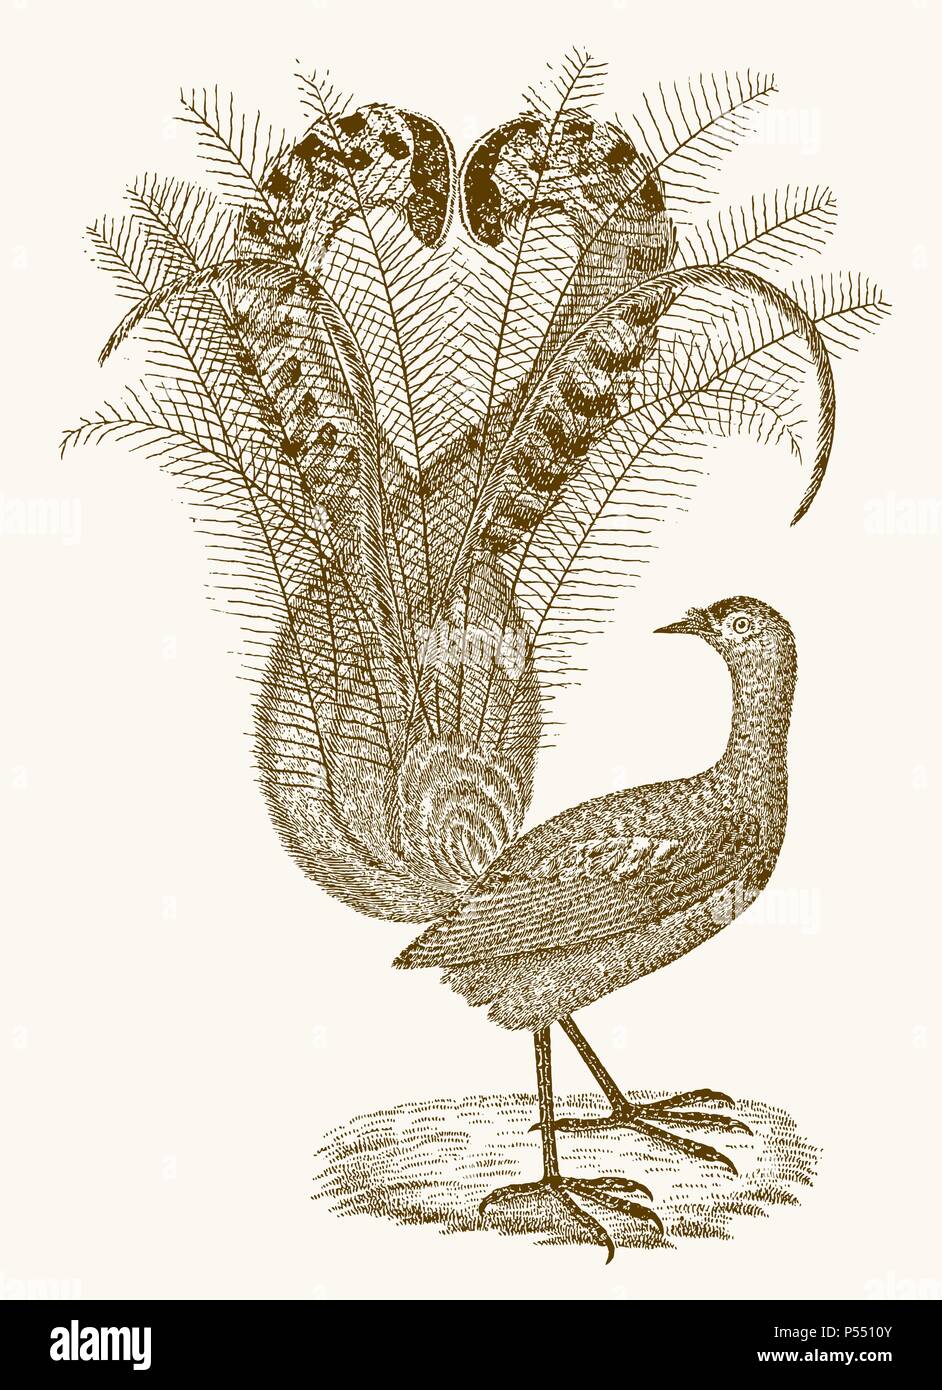 Superb lyrebird (menura novaehollandiae) with an elaborate tail. Illustration after a vintage engraving from the 19th century Stock Vector